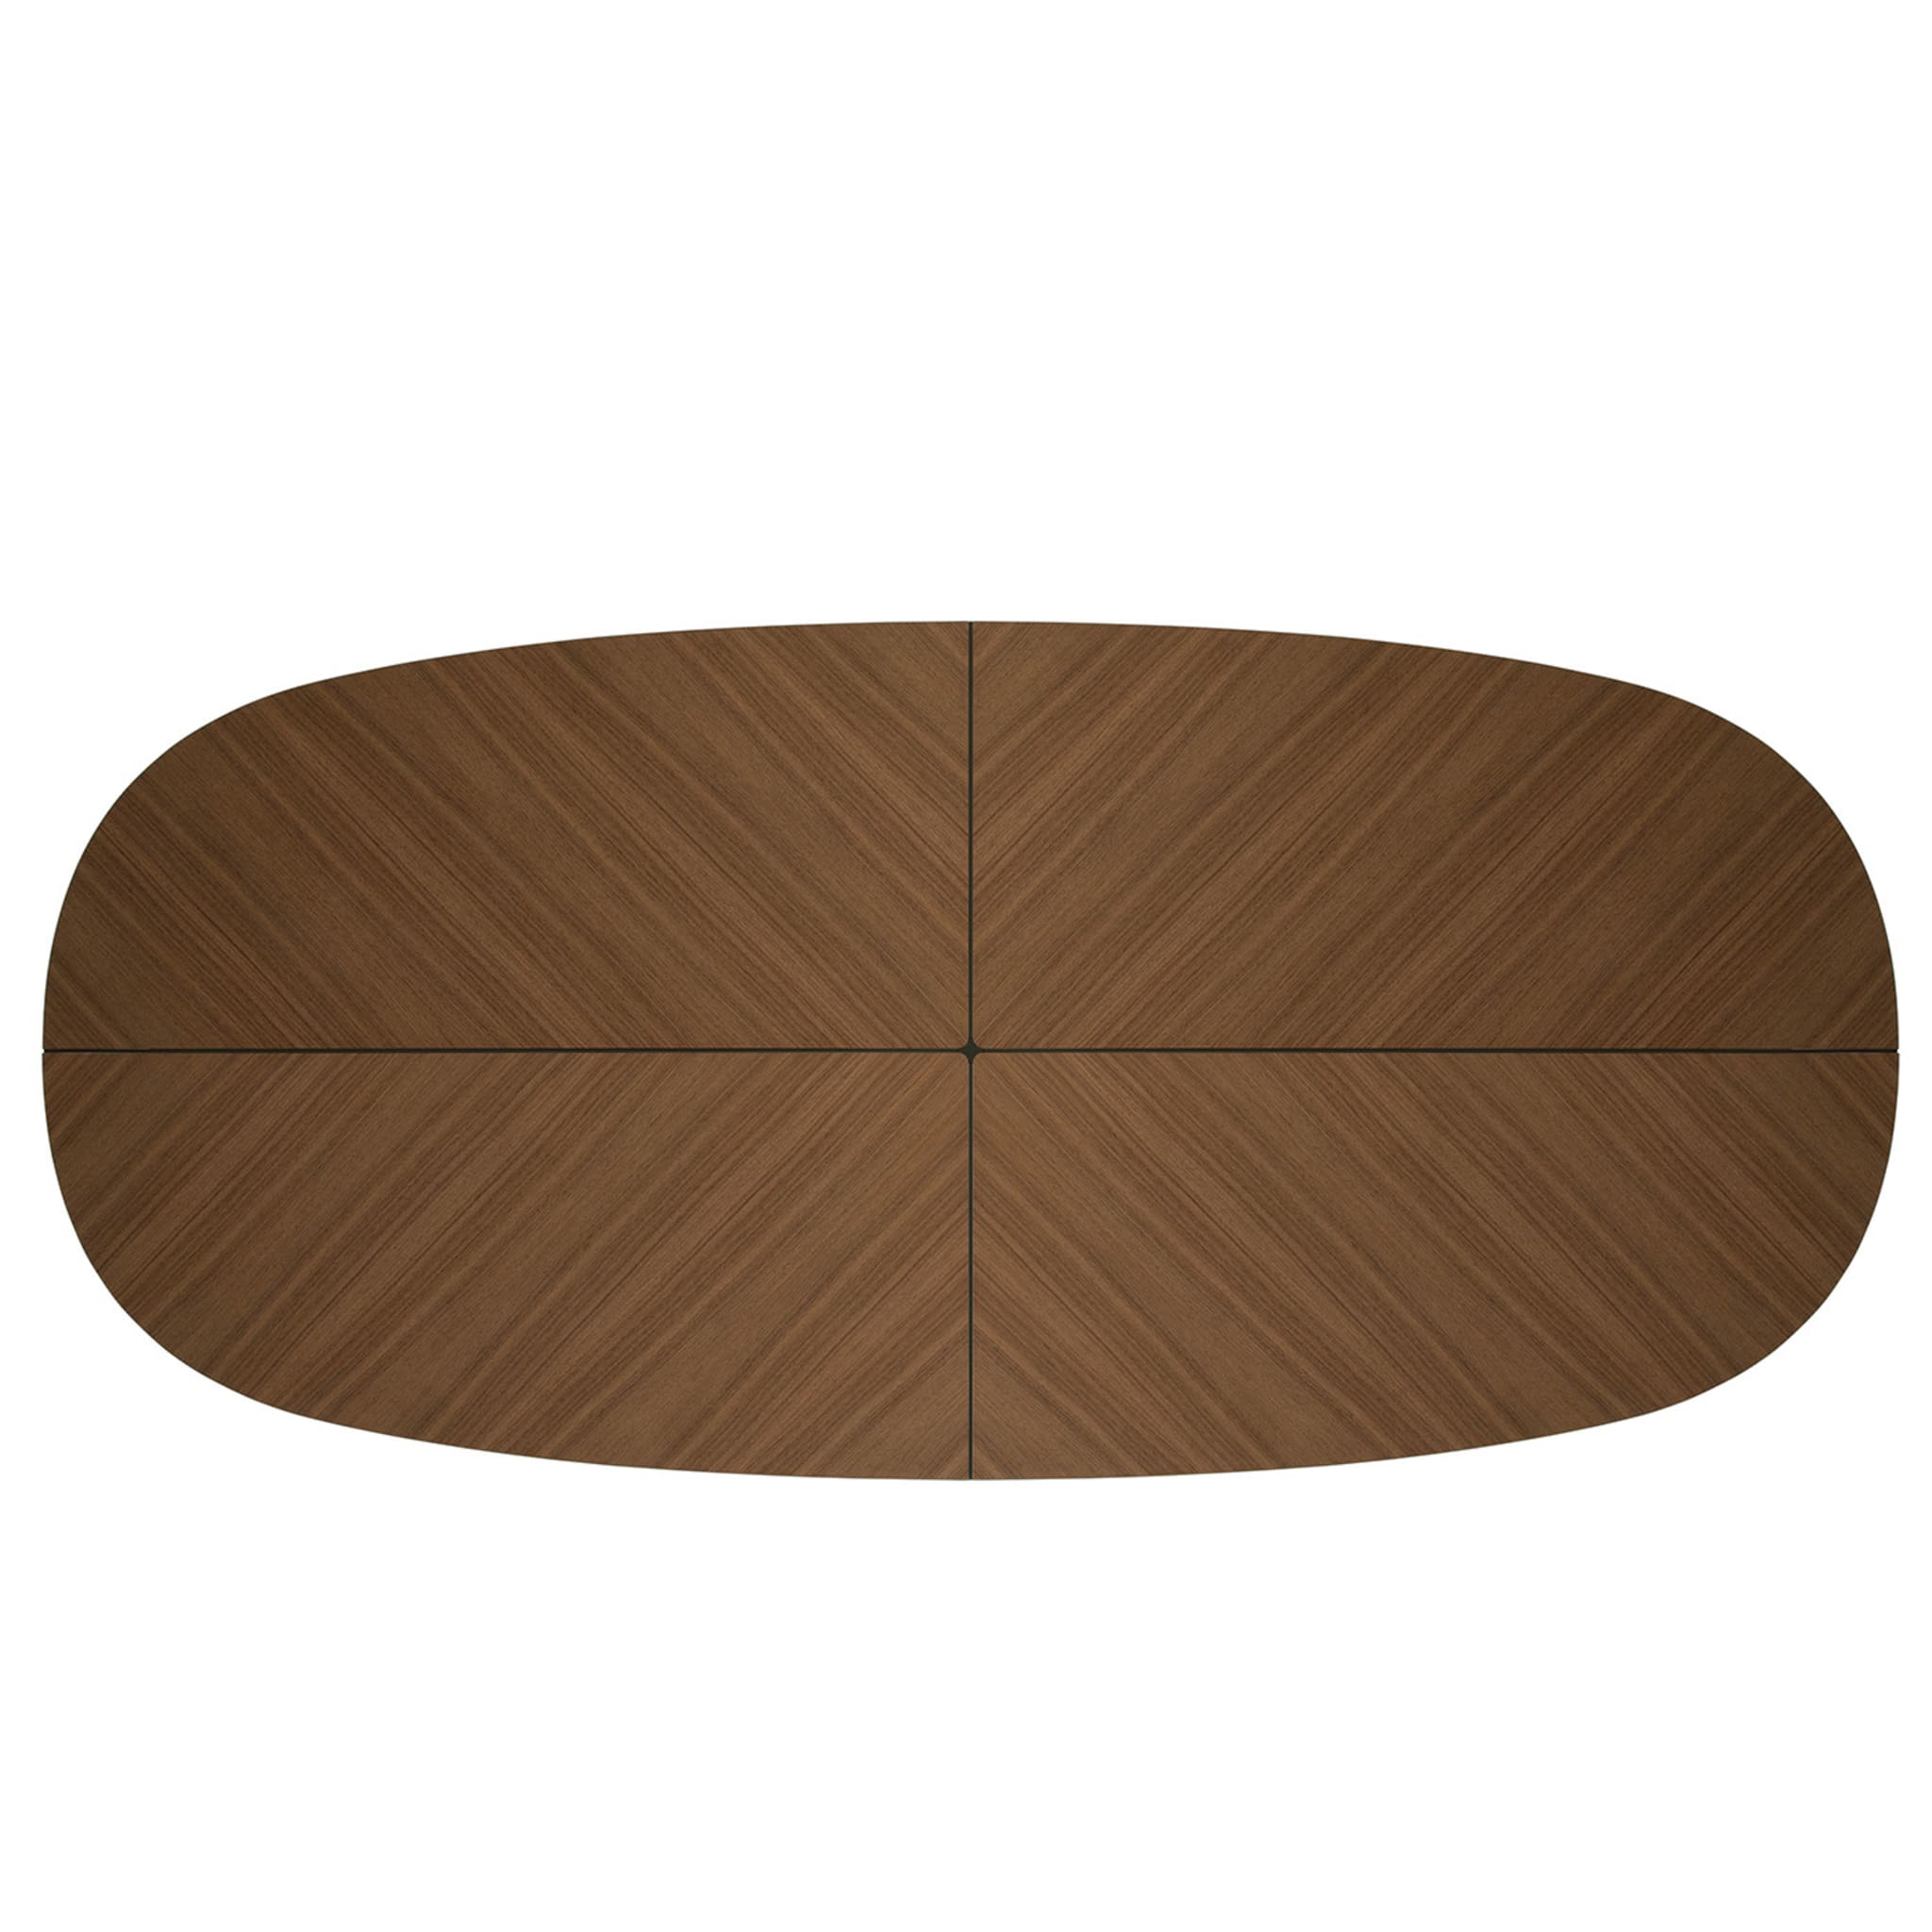 Ago Canaletto Walnut Dining Table - Alternative view 5